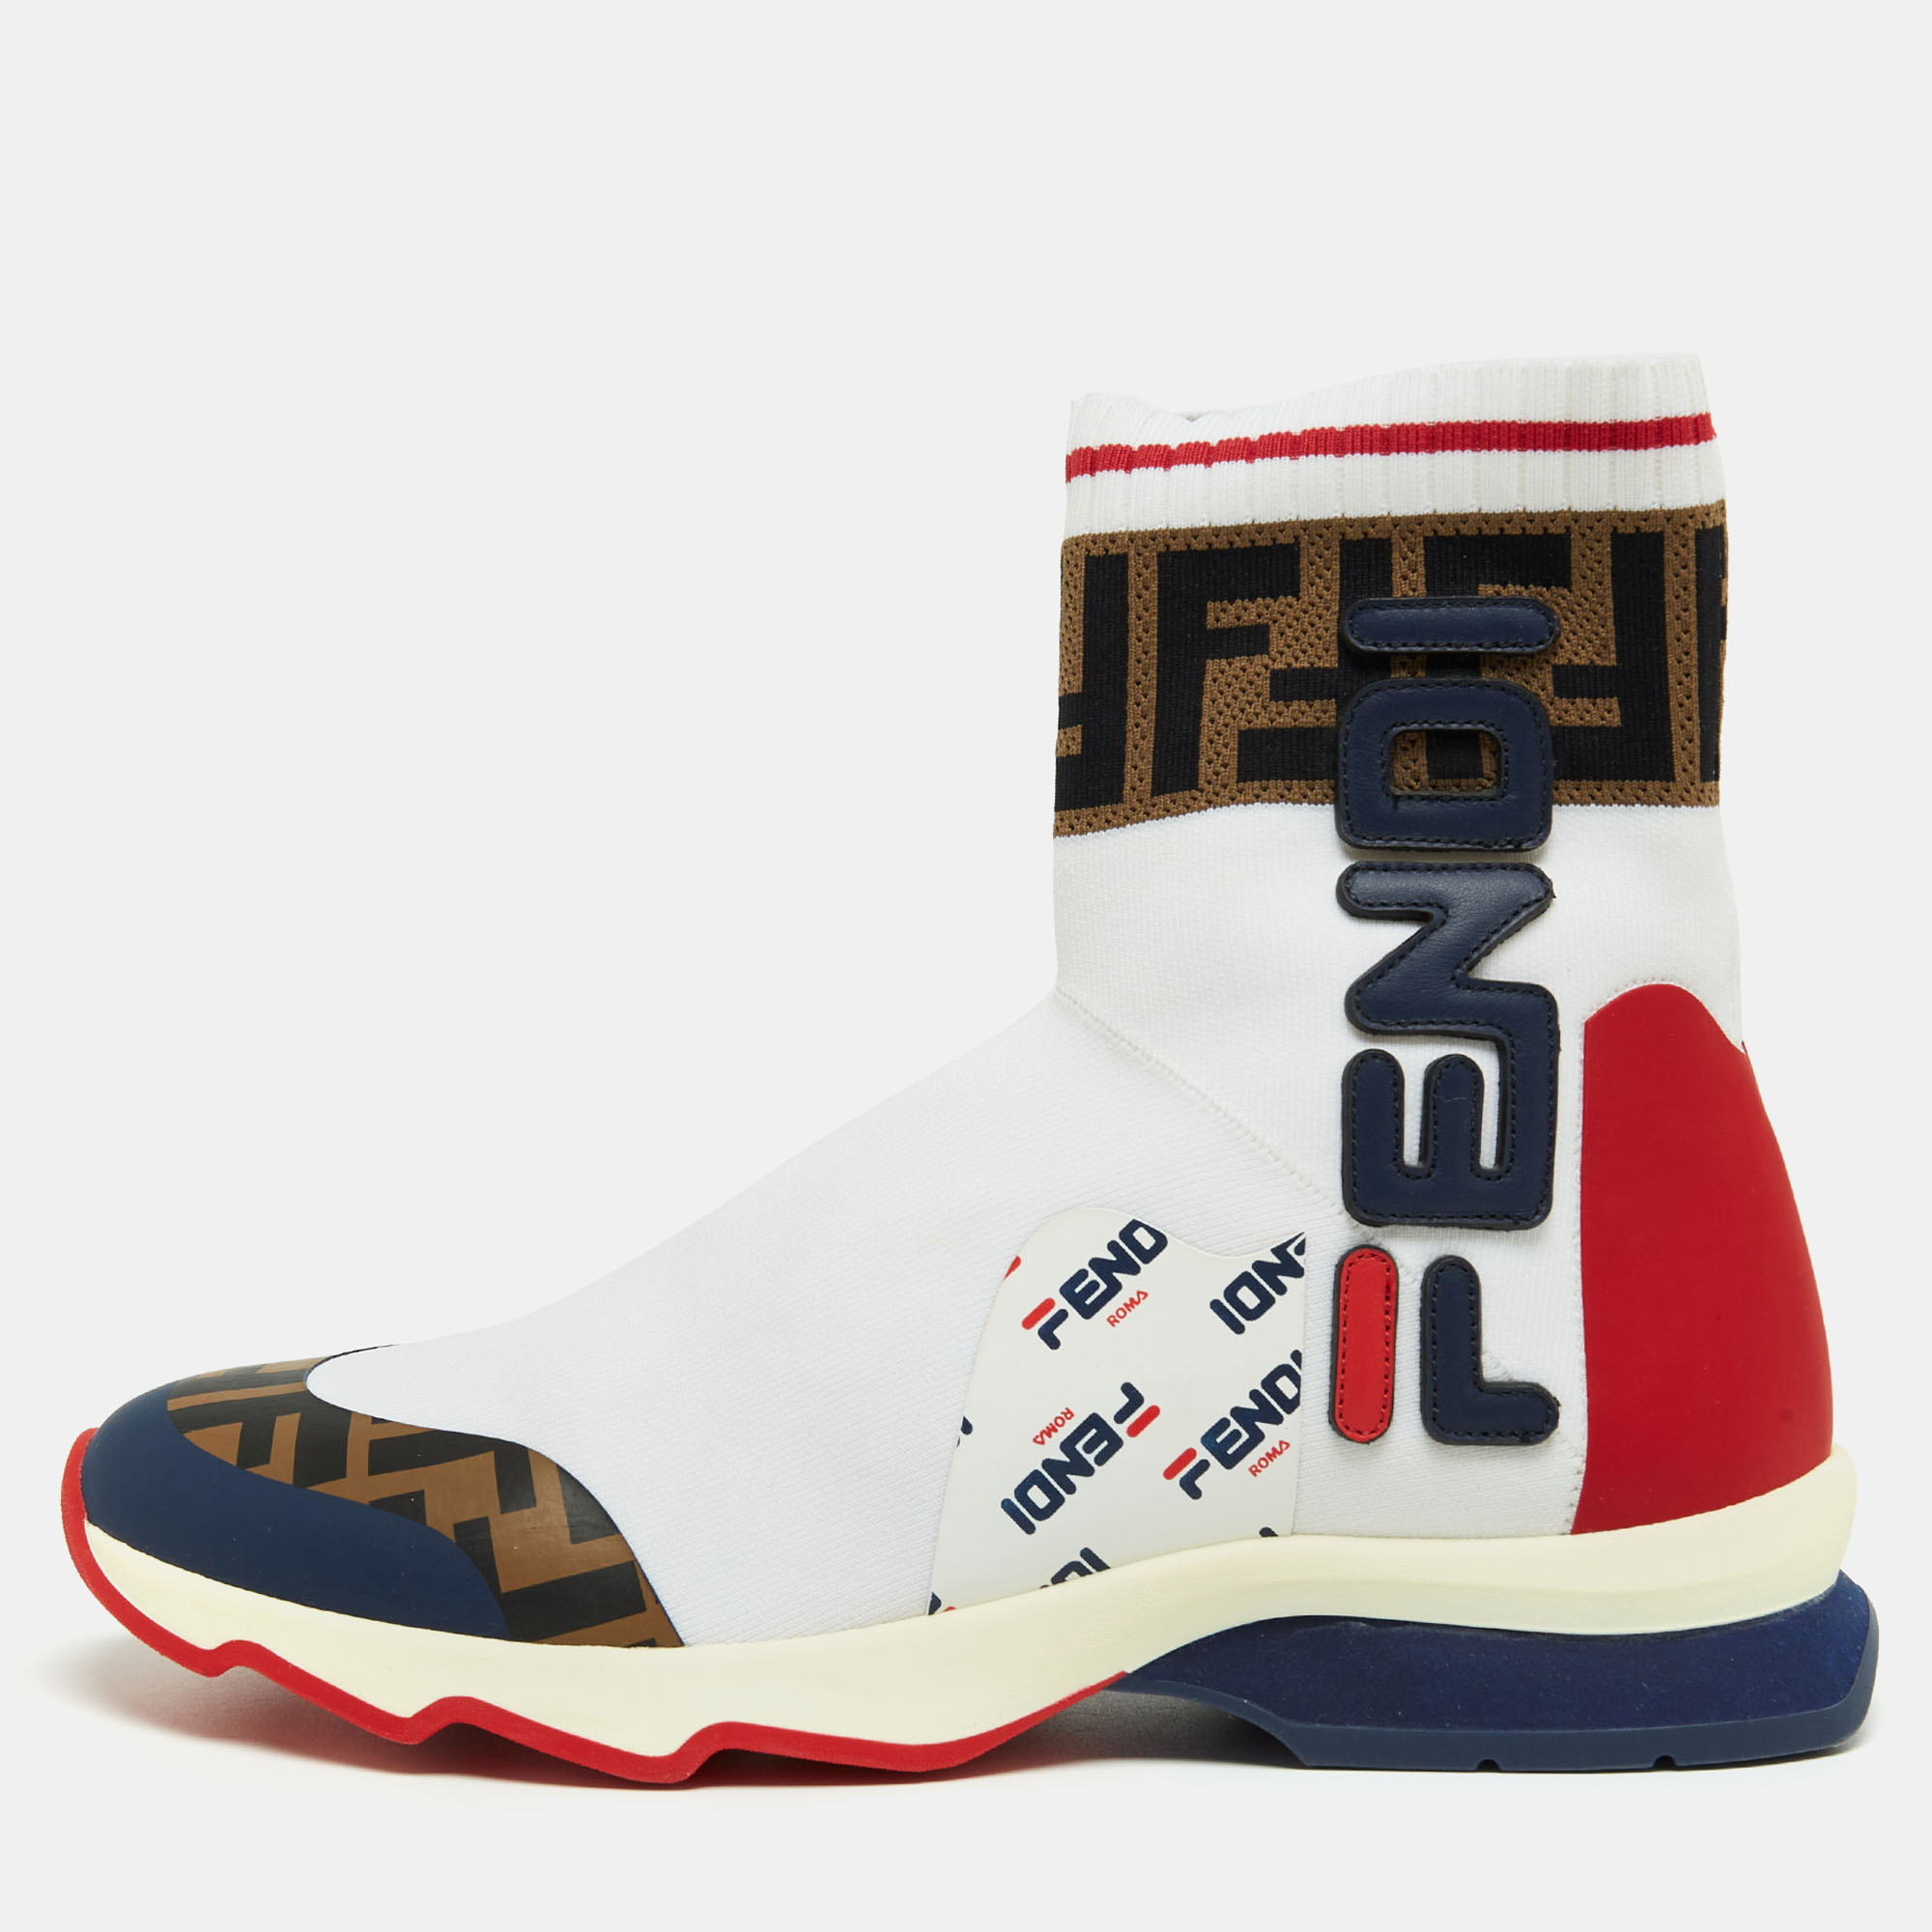 Give your outfit a luxe update with this pair of Fendi x Fila sneakers. The shoes are sewn perfectly to help you make a statement in them for a long time.